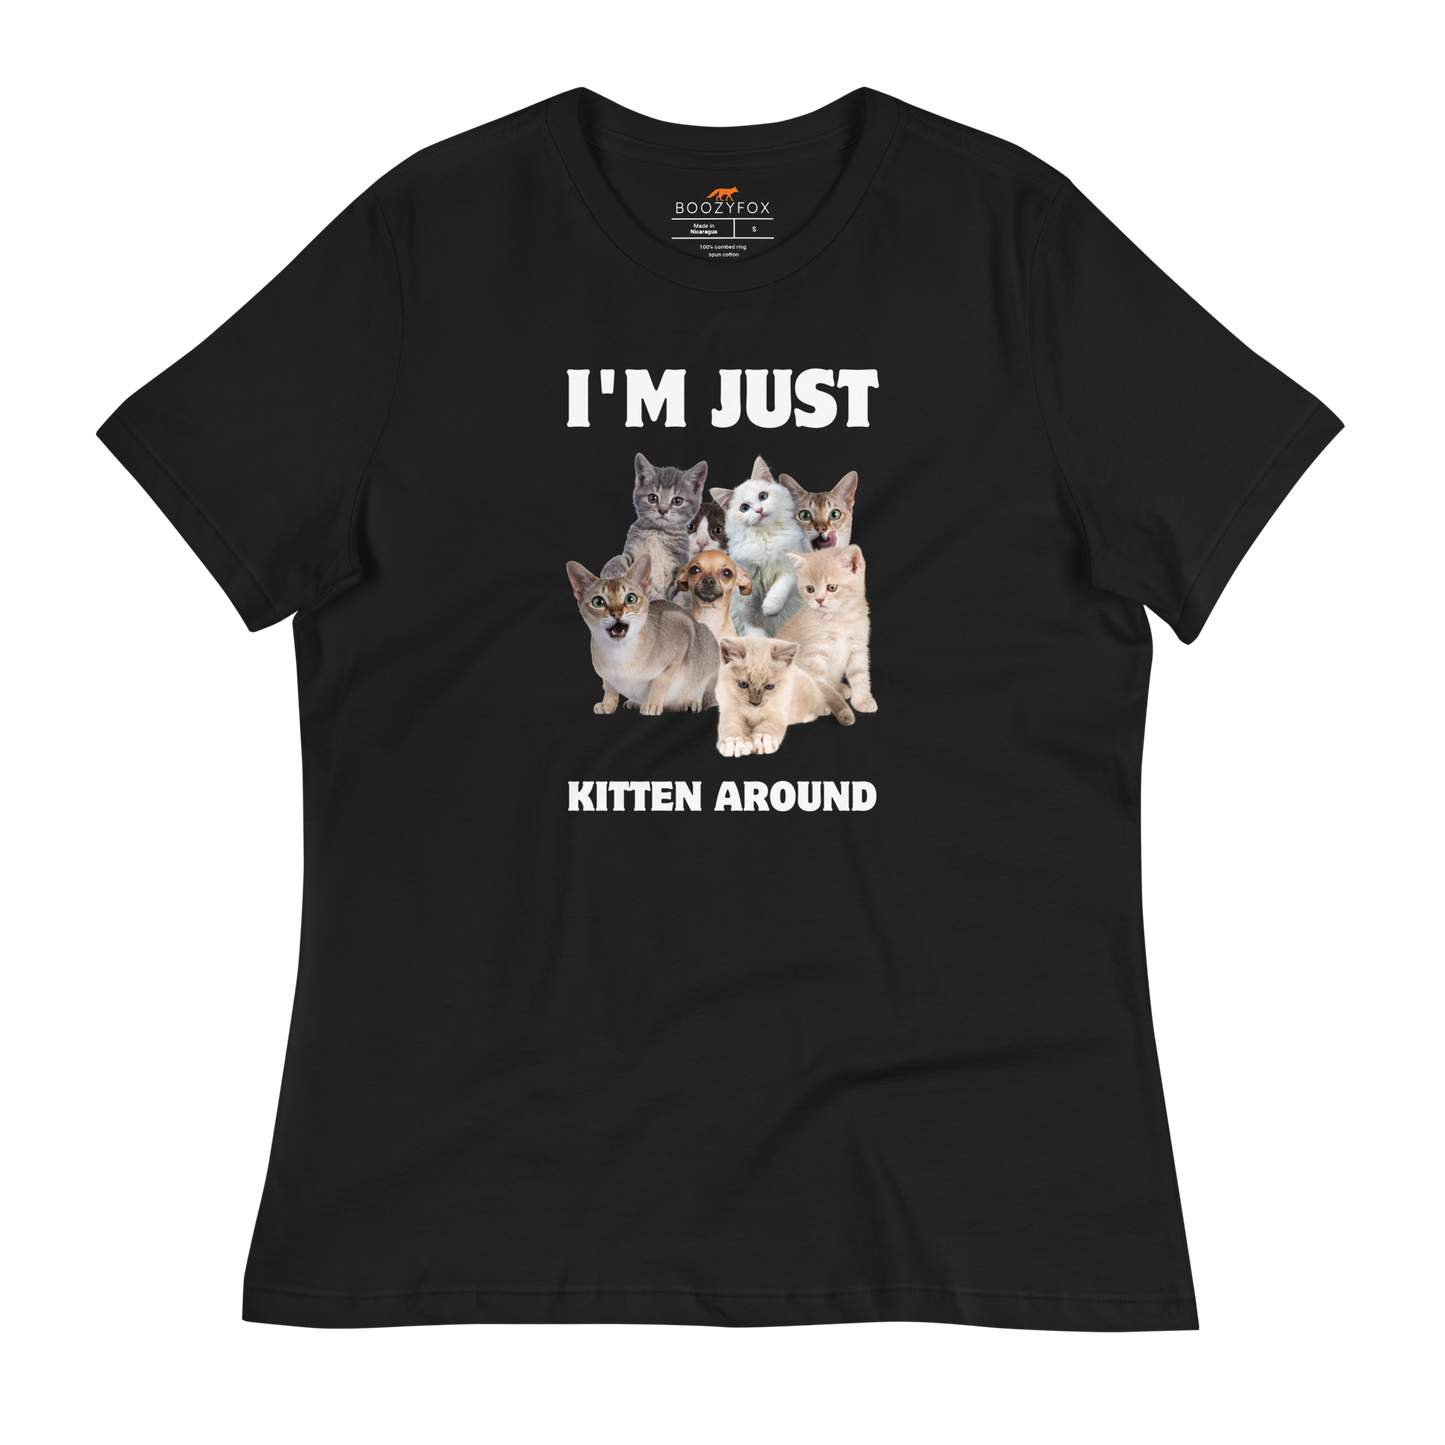 Women's Relaxed Black Cat T-Shirt featuring an I'm Just Kitten Around graphic on the chest - Funny Graphic Cat Tees - Boozy Fox